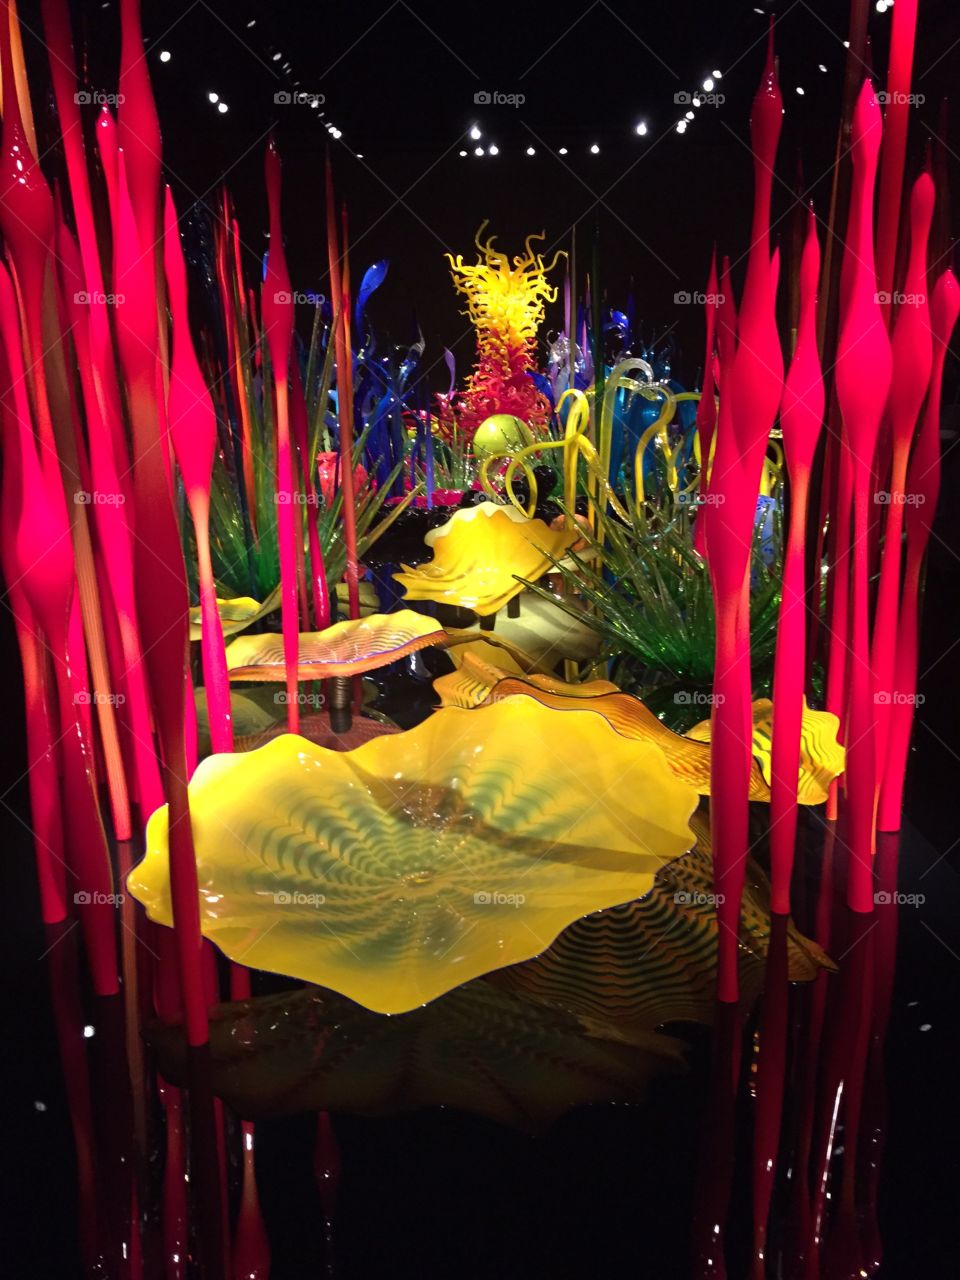 Chihuly Glass Garden, Seattle